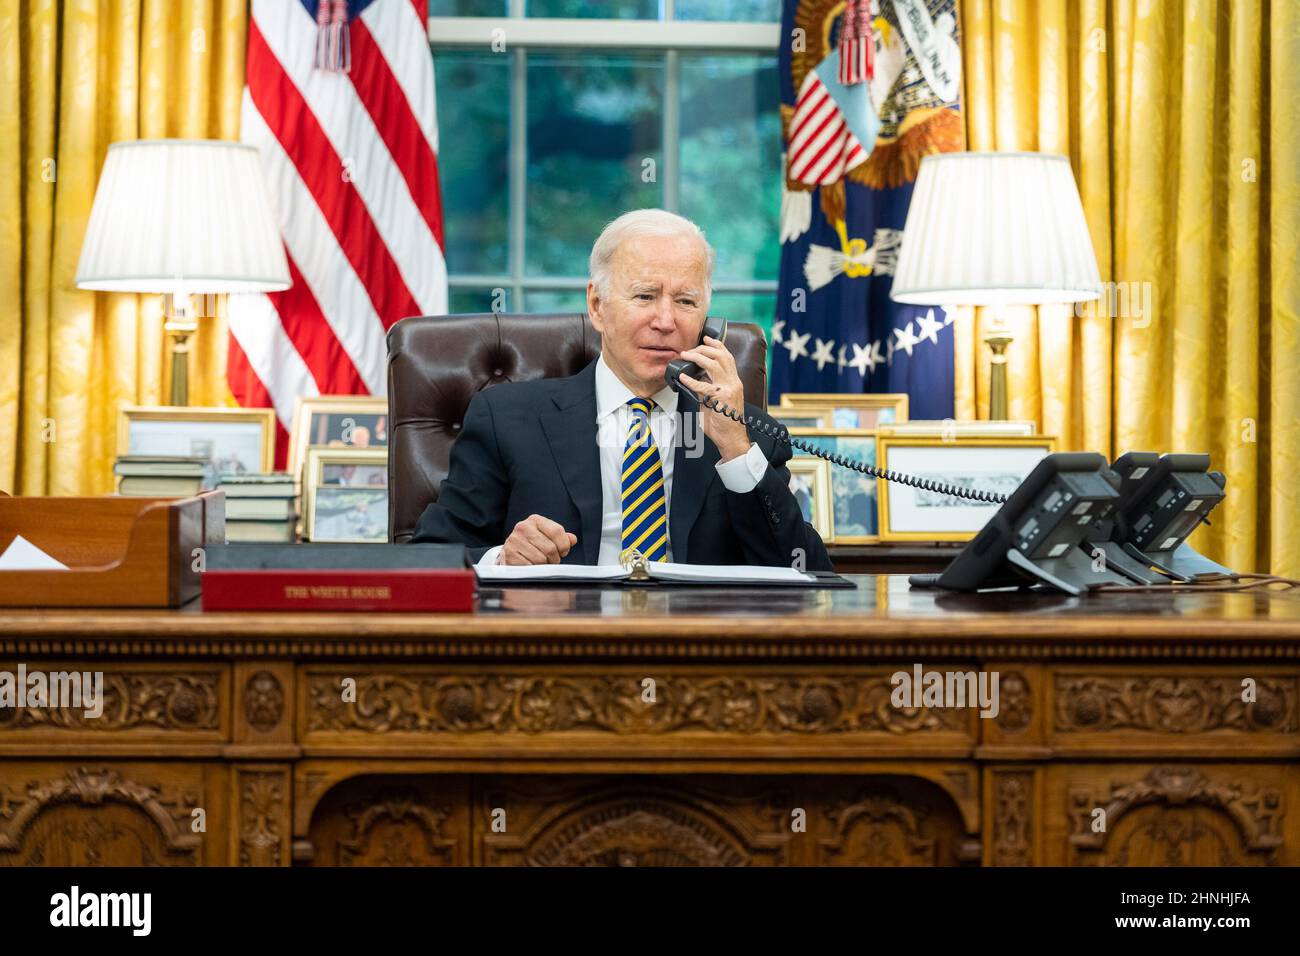 Washington, District of Columbia, USA. 12th Nov, 2021. President Joe Biden talks on the phone with Sen. Patrick Leahy, D-Vt., Friday, November 12, 2021, in the Oval Office of the White House. (Photo by Adam Schultz) Credit: White House/ZUMA Press Wire Service/ZUMAPRESS.com/Alamy Live News Stock Photo